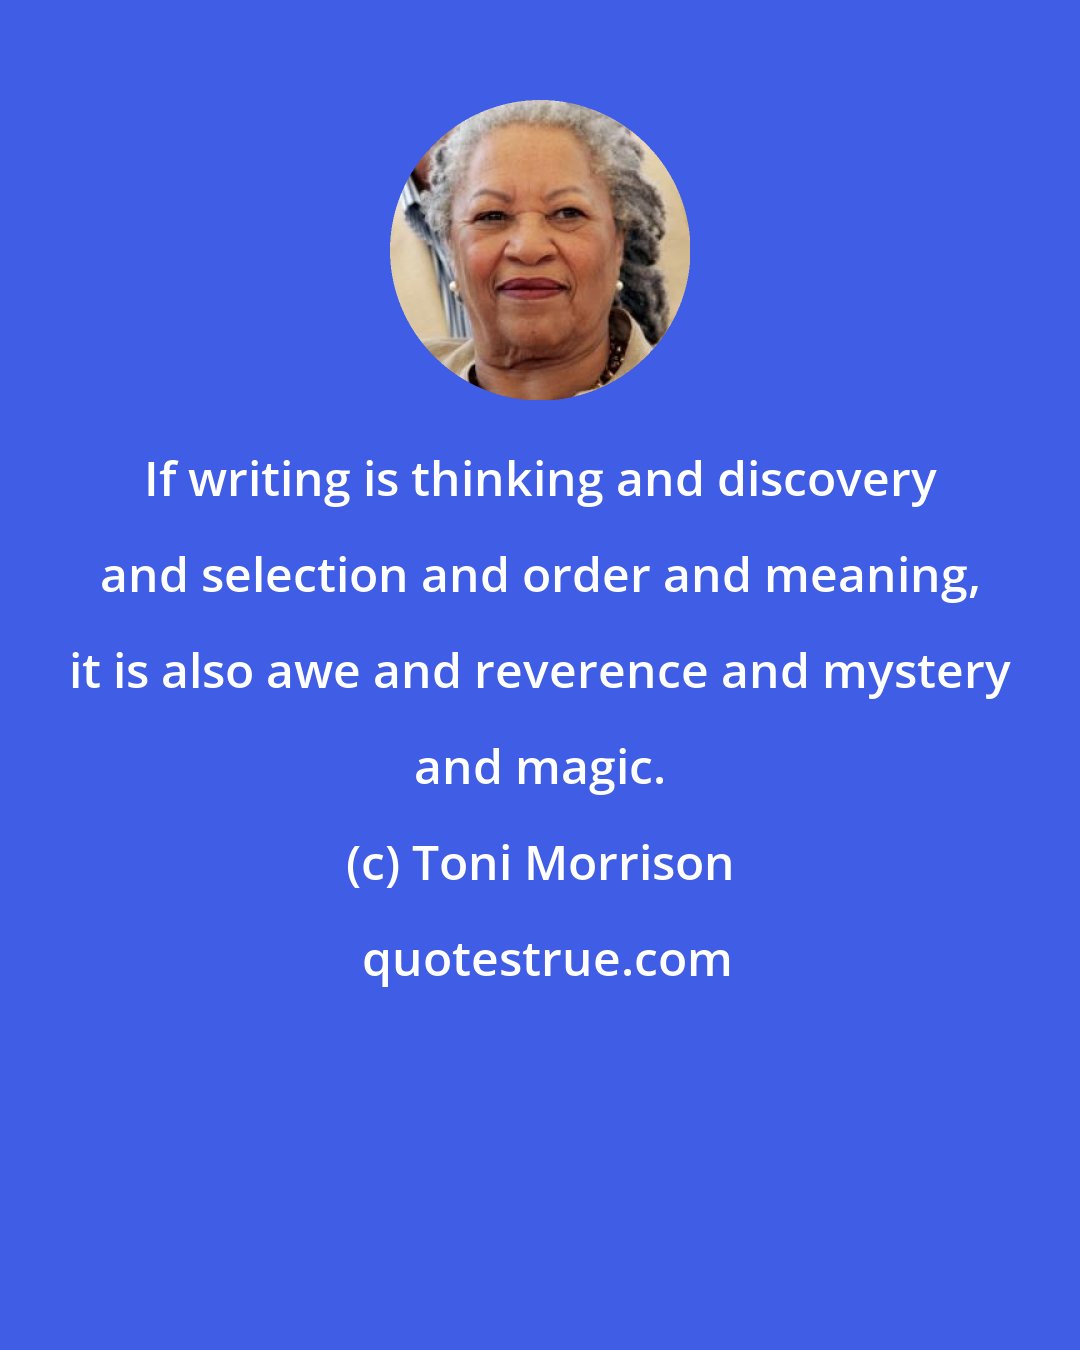 Toni Morrison: If writing is thinking and discovery and selection and order and meaning, it is also awe and reverence and mystery and magic.